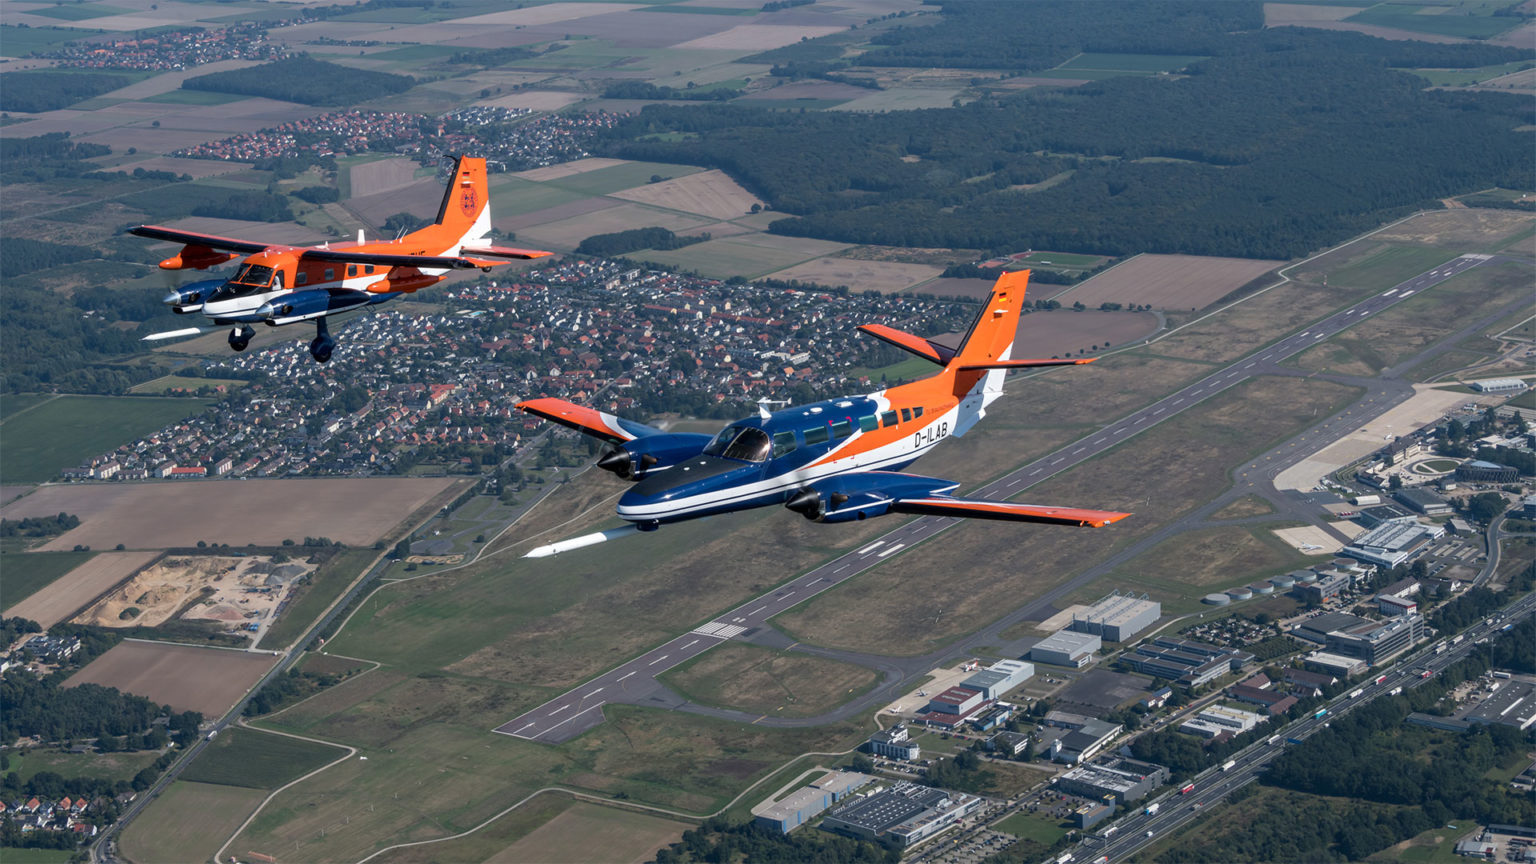 Nosebooms on D-IBUF and D-LAB at Braunschweig airport